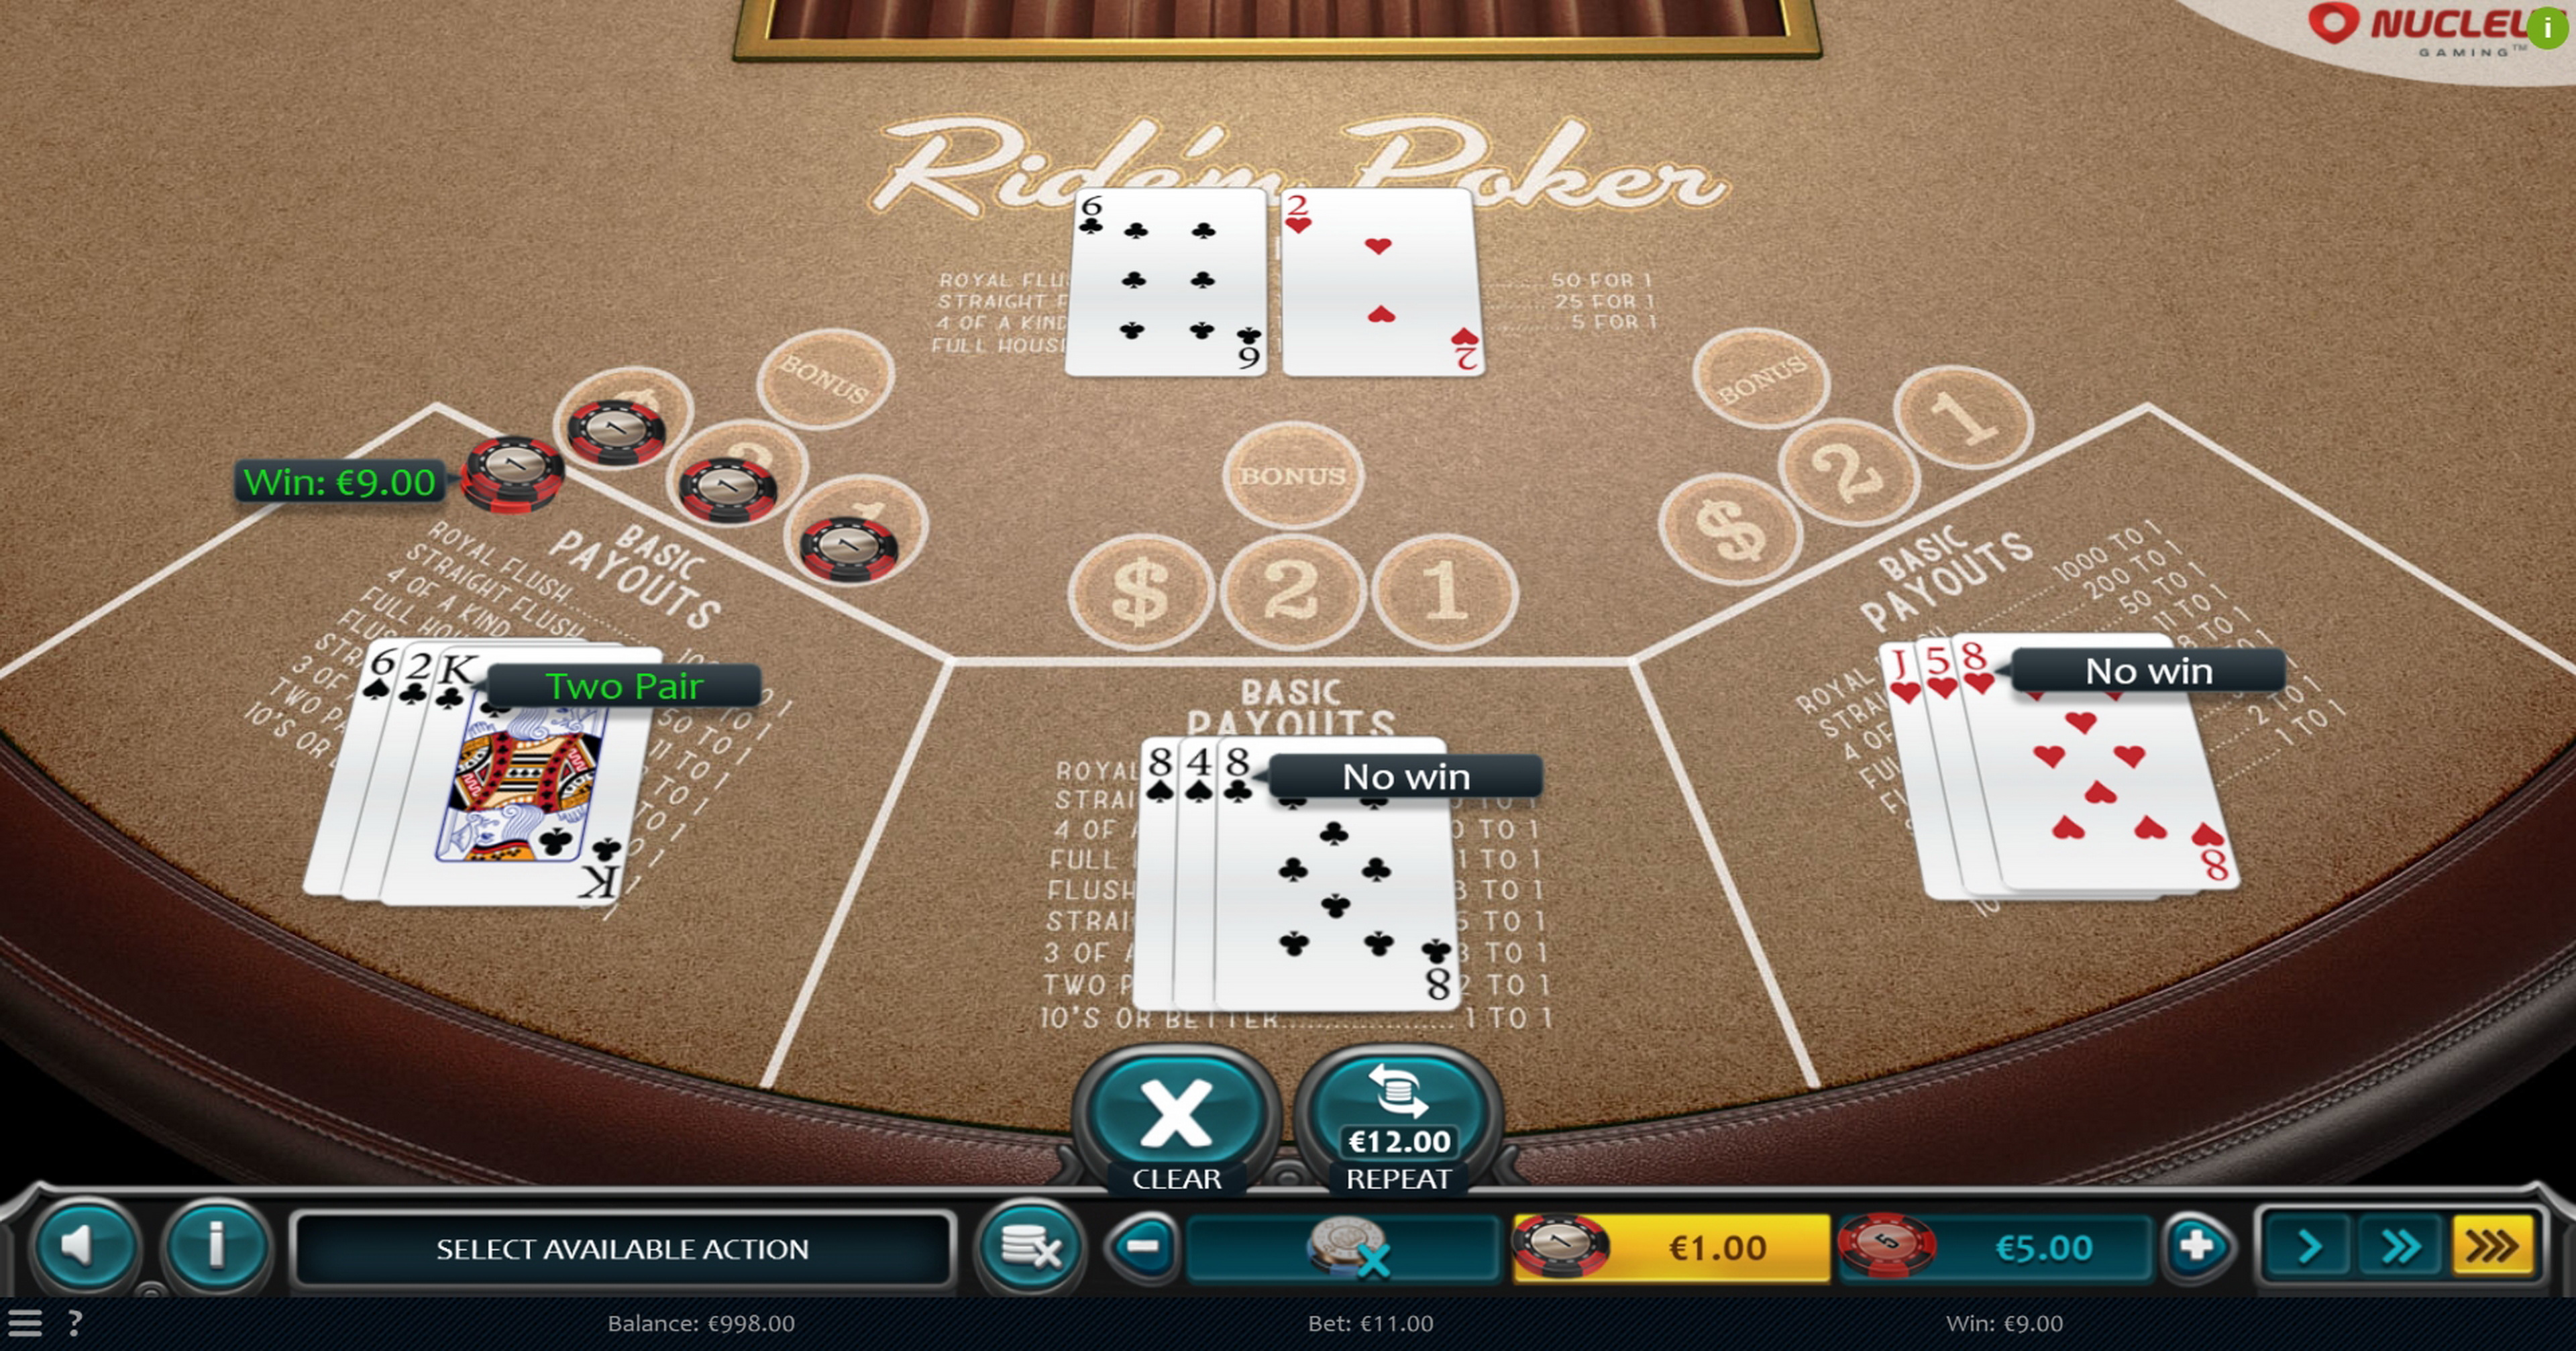 Win Money in Ride'm Poker Free Slot Game by Nucleus Gaming